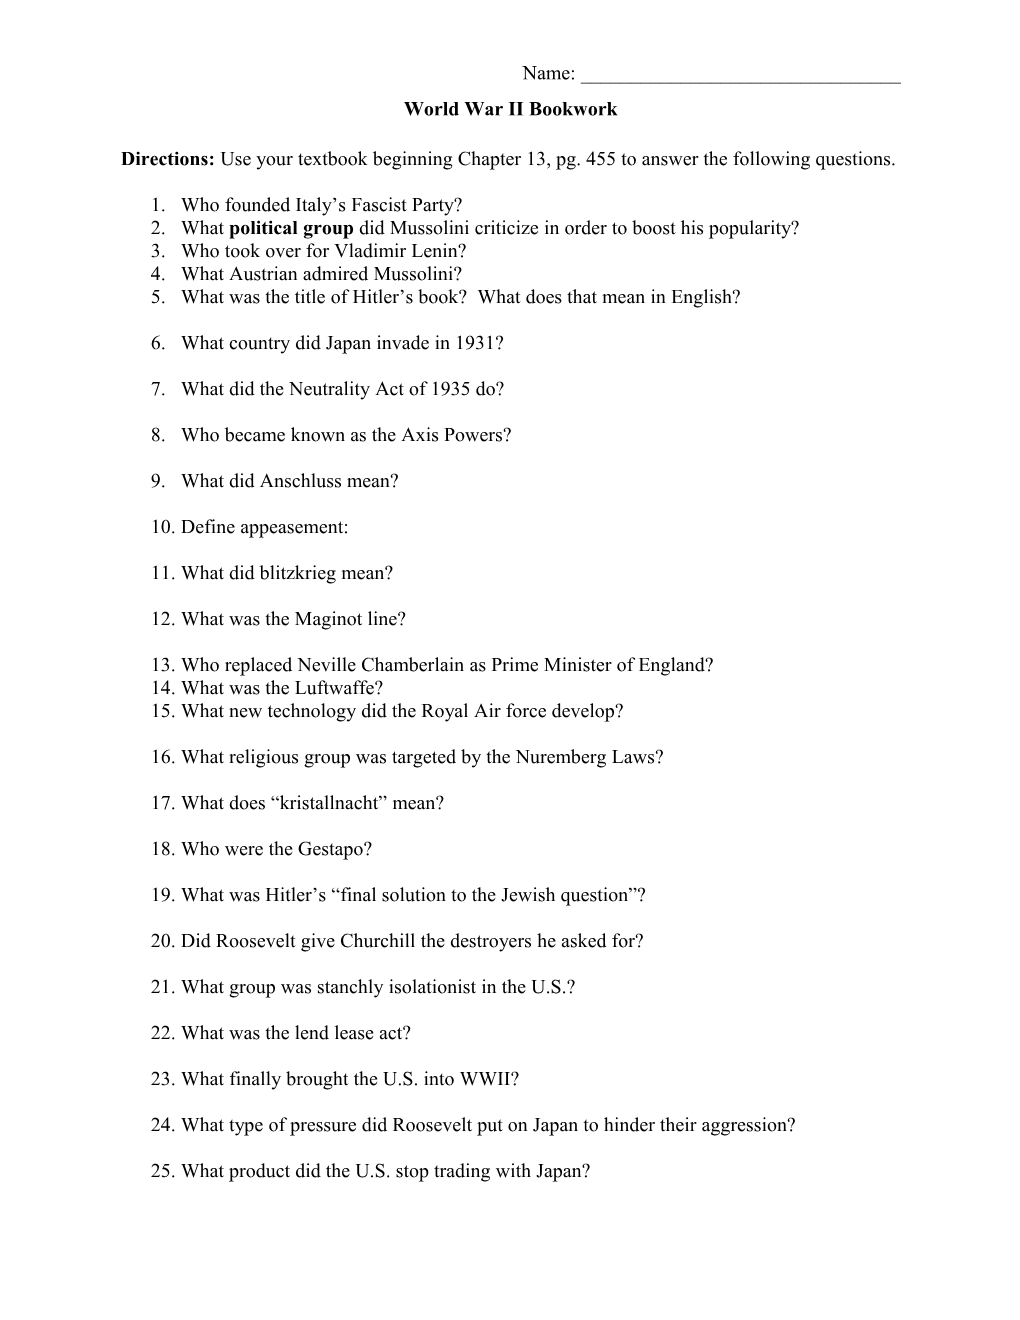 WWII Introduction Worksheet